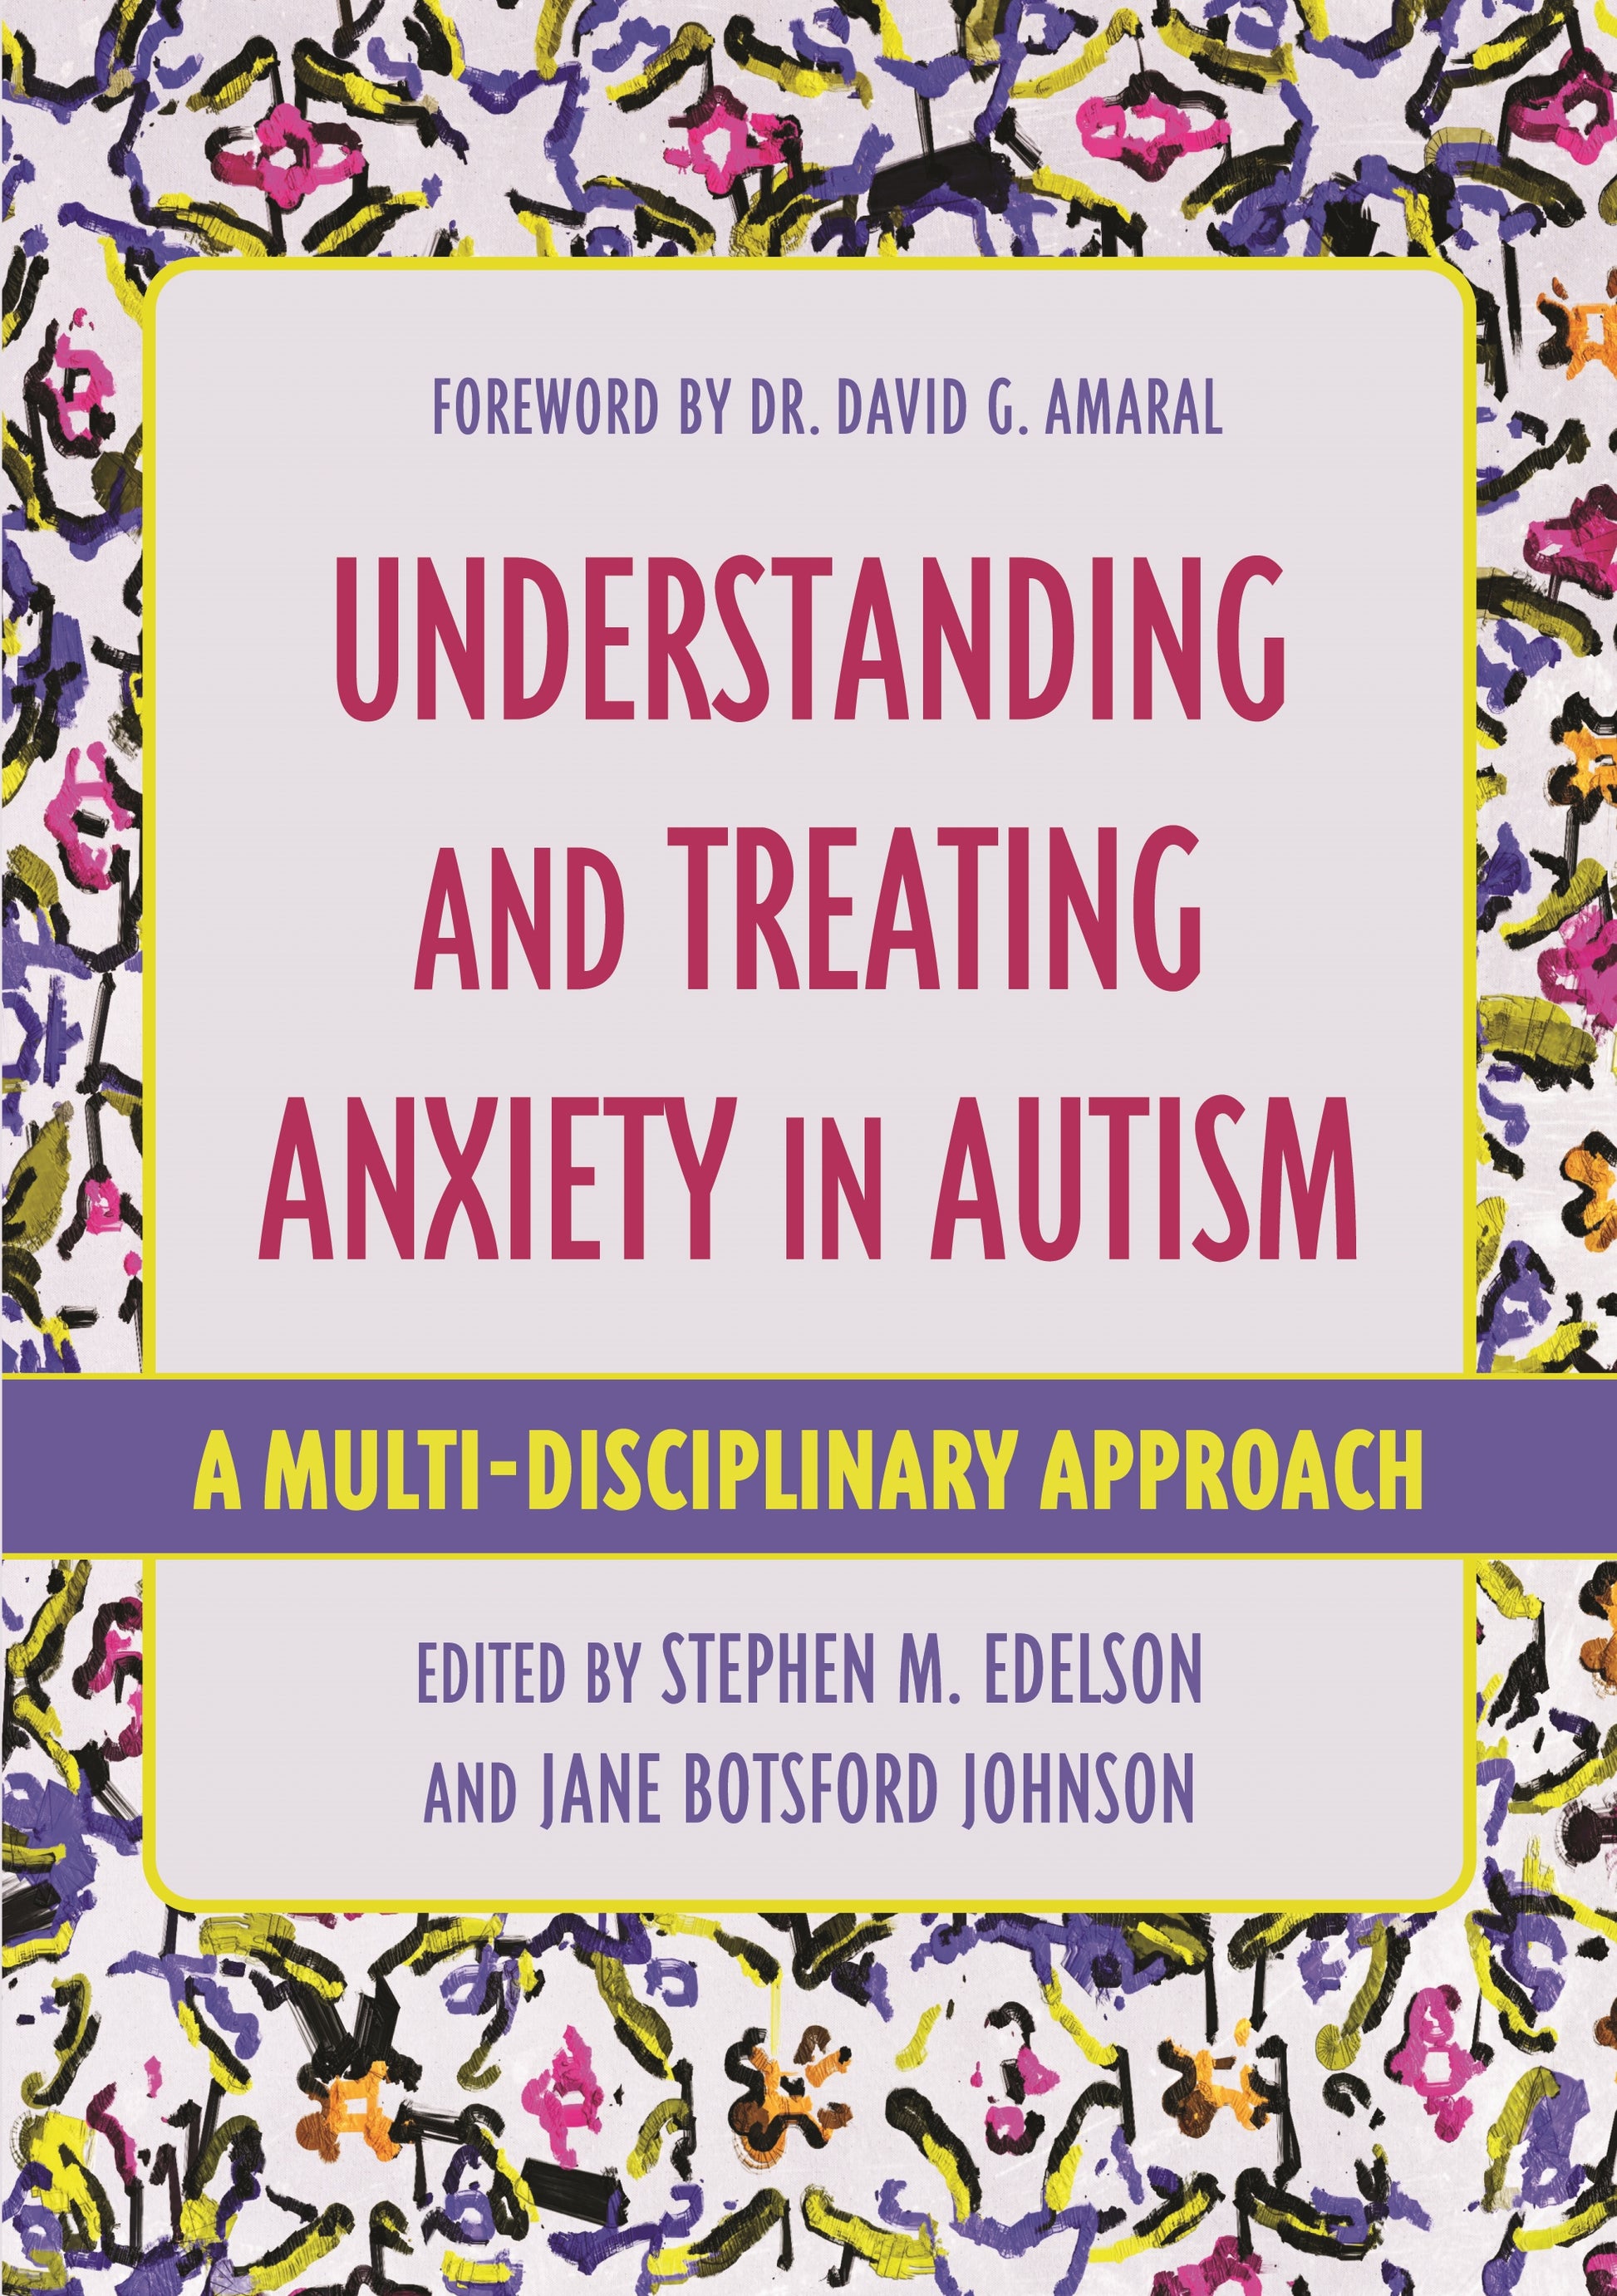 Understanding and Treating Anxiety in Autism by Stephen M. Edelson, Jane Botsford Johnson, No Author Listed, David Amaral